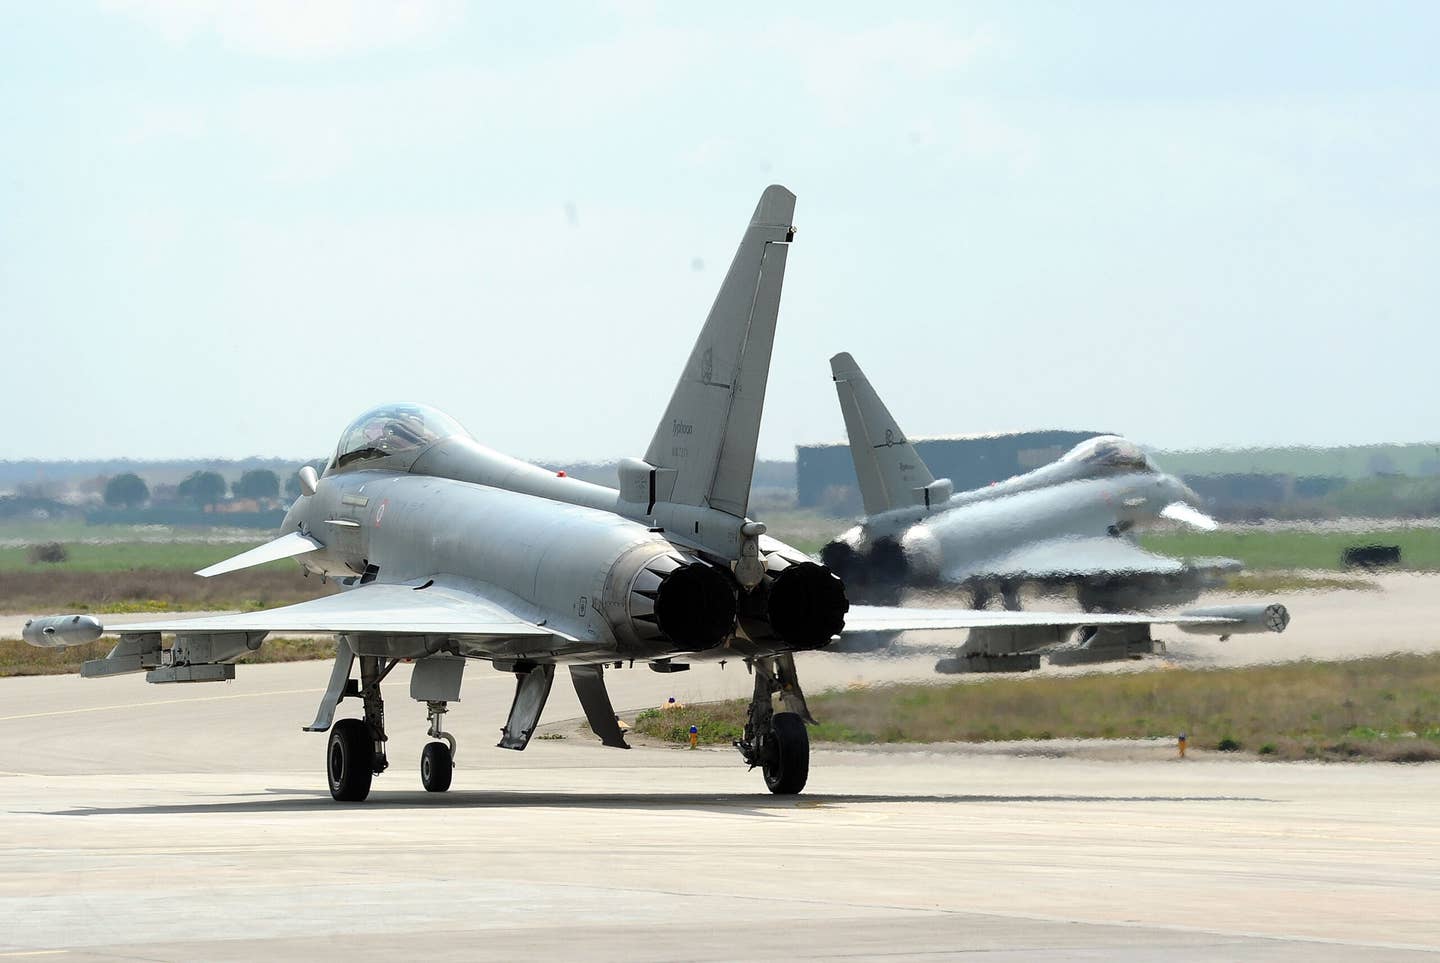 A pair of Italian Air Force F-2000 Typhoons prepare to take off from Gioia Del Colle Air Base in March 2011, for a sortie over Libya to enforce the no-fly zone there. <em>Photo by Giuseppe Bellini/Getty Images</em>